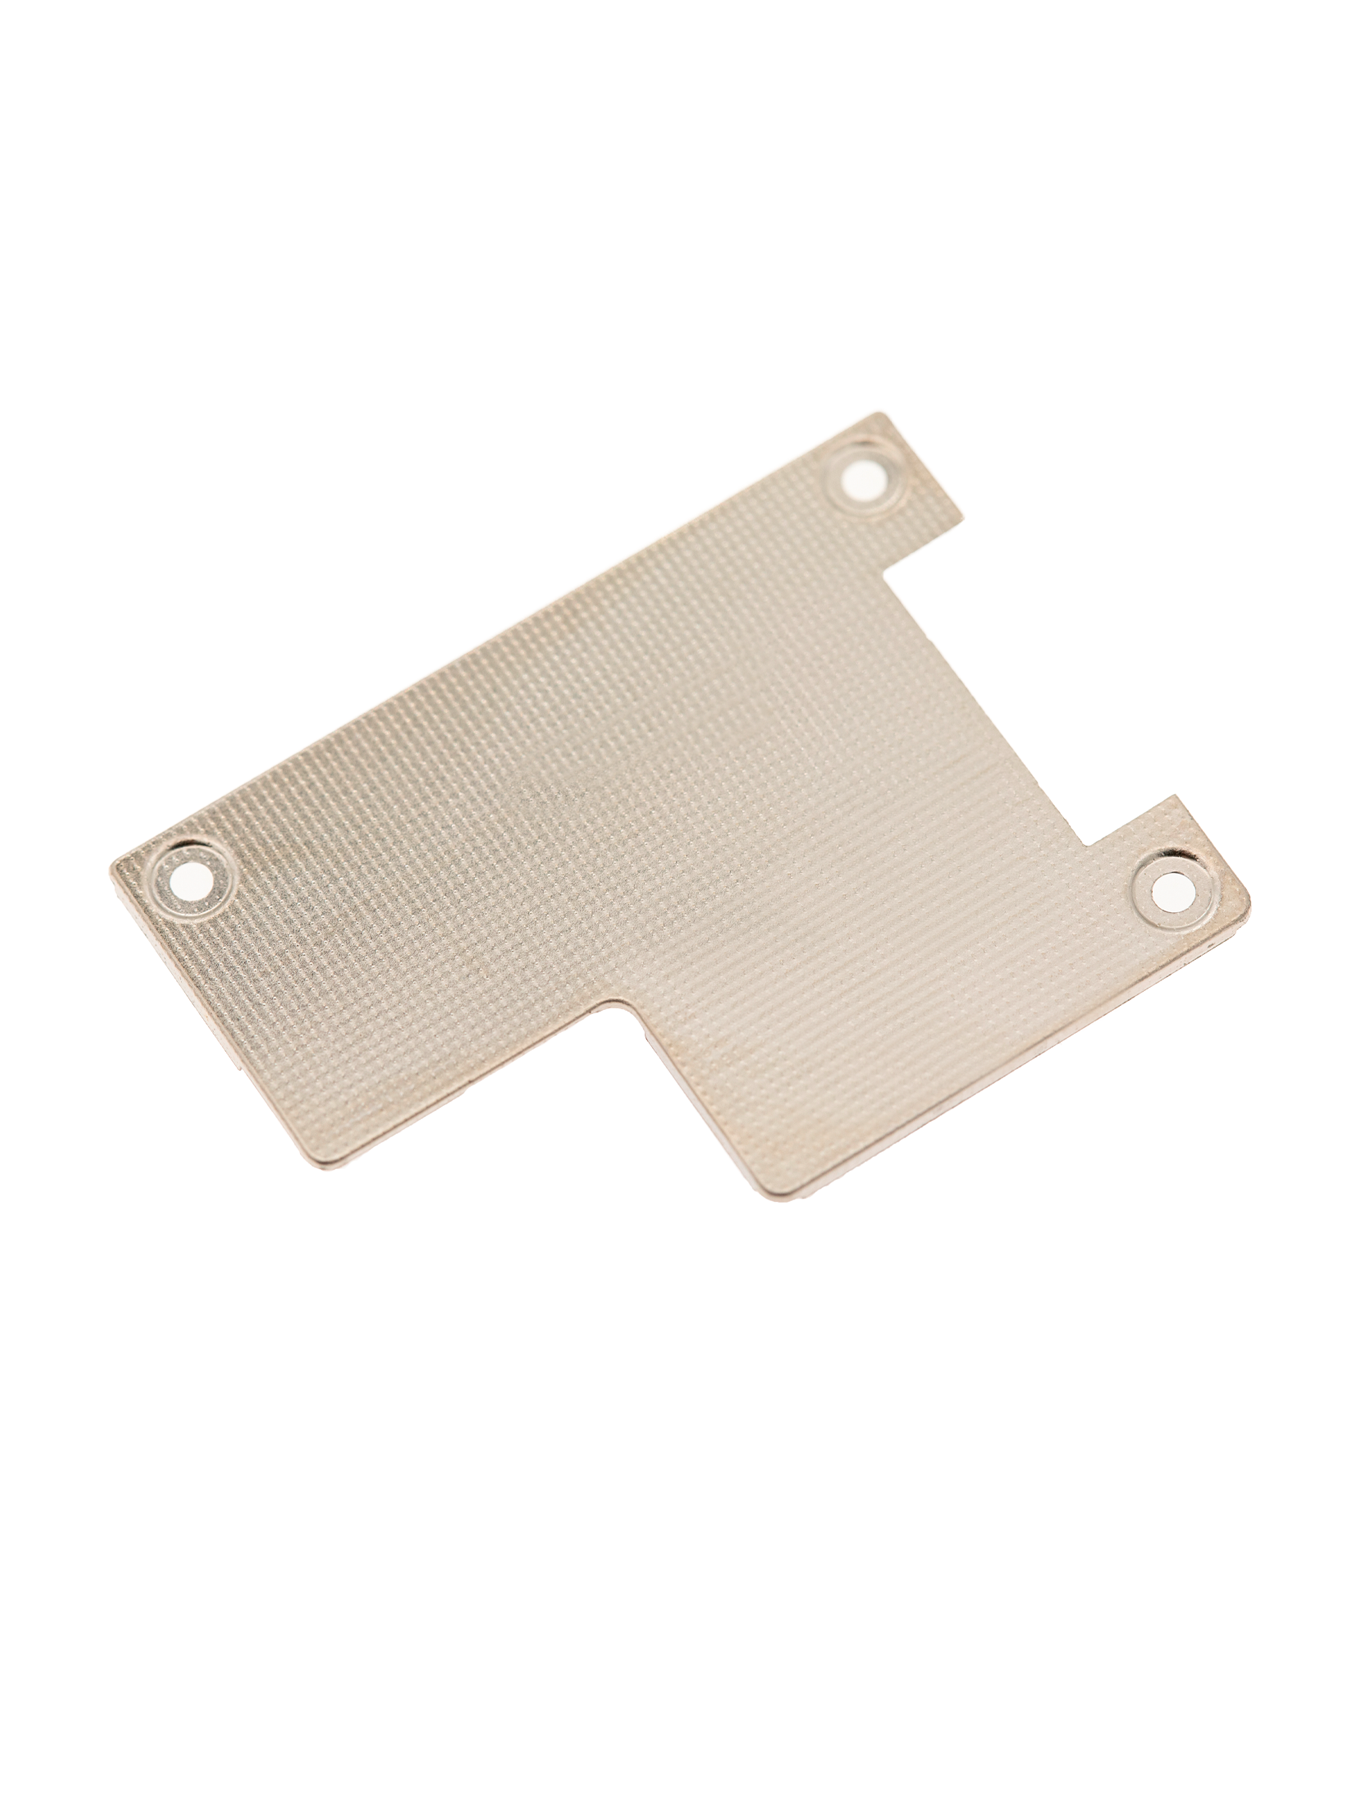 LCD FLEX CABLE HOLDING BRACKET (ON THE MAINBOARD) COMPATIBLE WITH IPAD PRO 9.7"